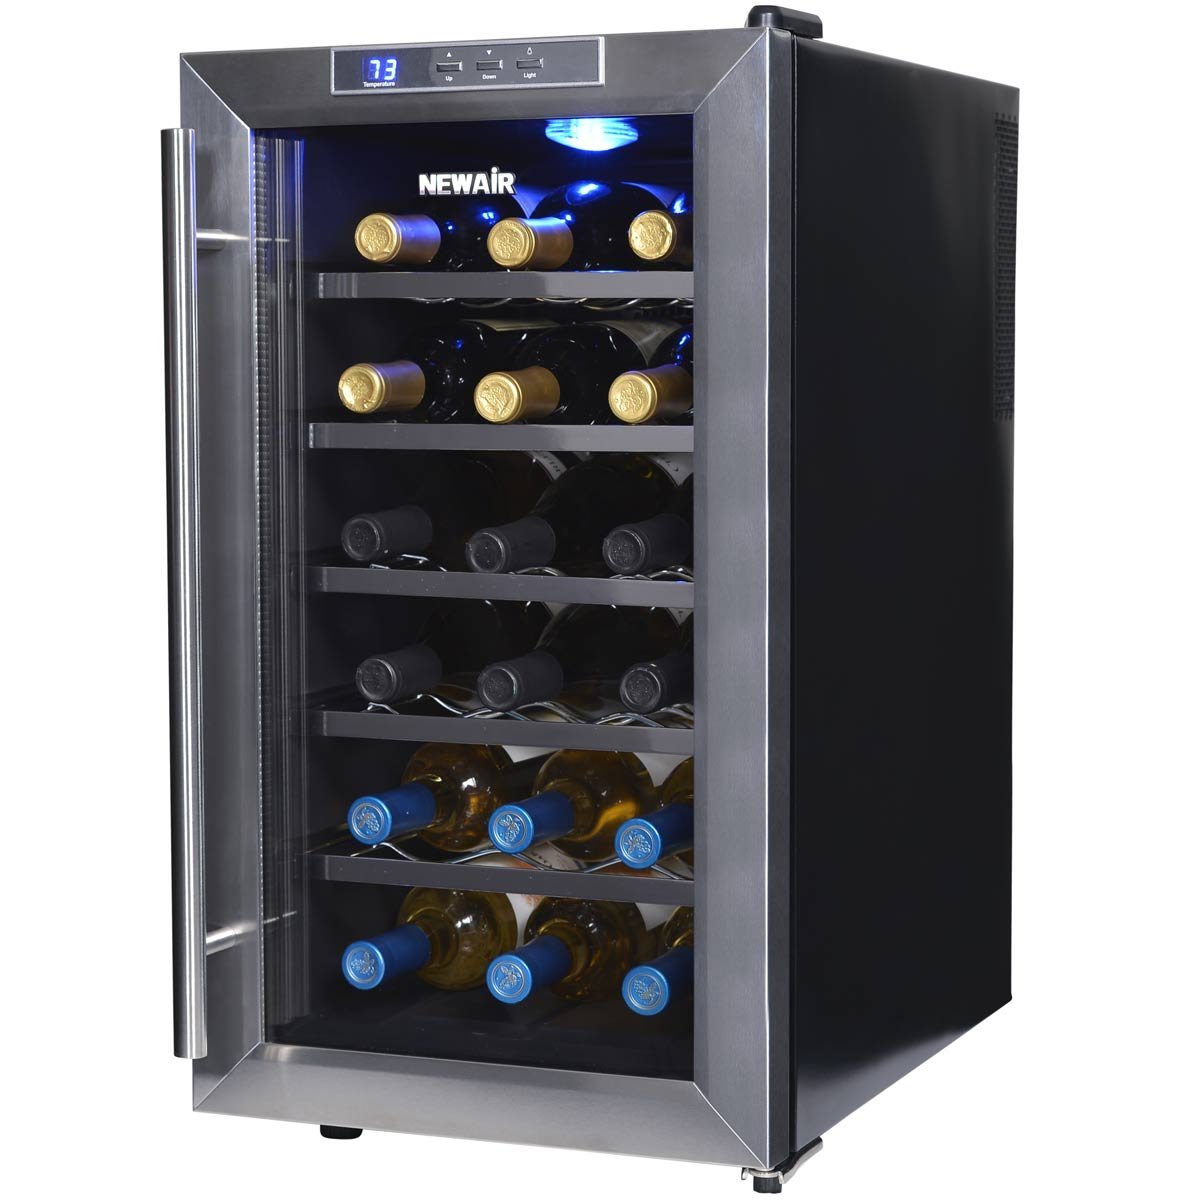 NewAir 18 bottle Thermoelectric wine cooler-AW-181E